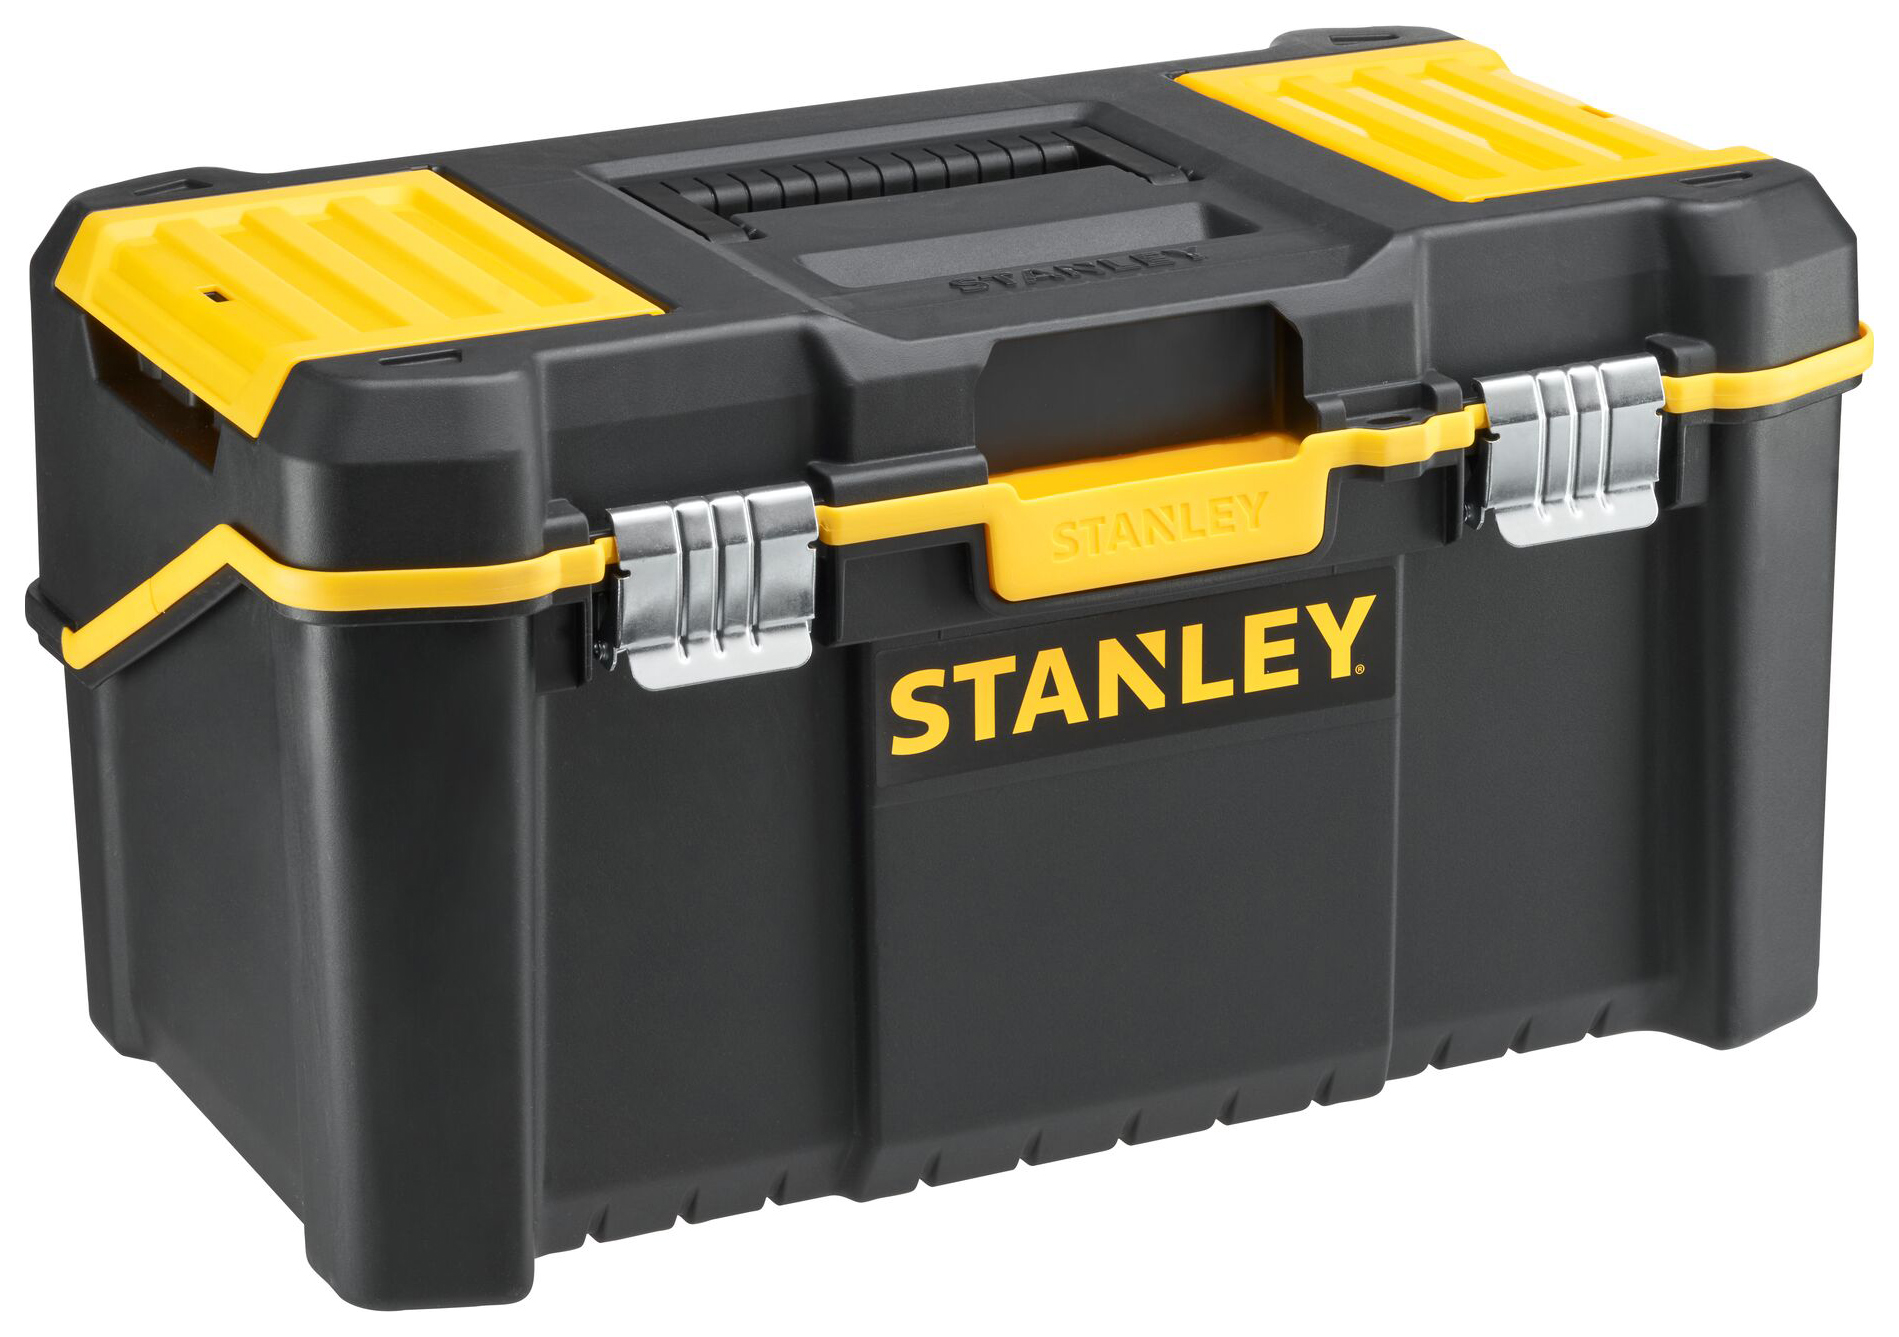 Image of Stanley STST83397-1 3 Level Cantilever Tool Box